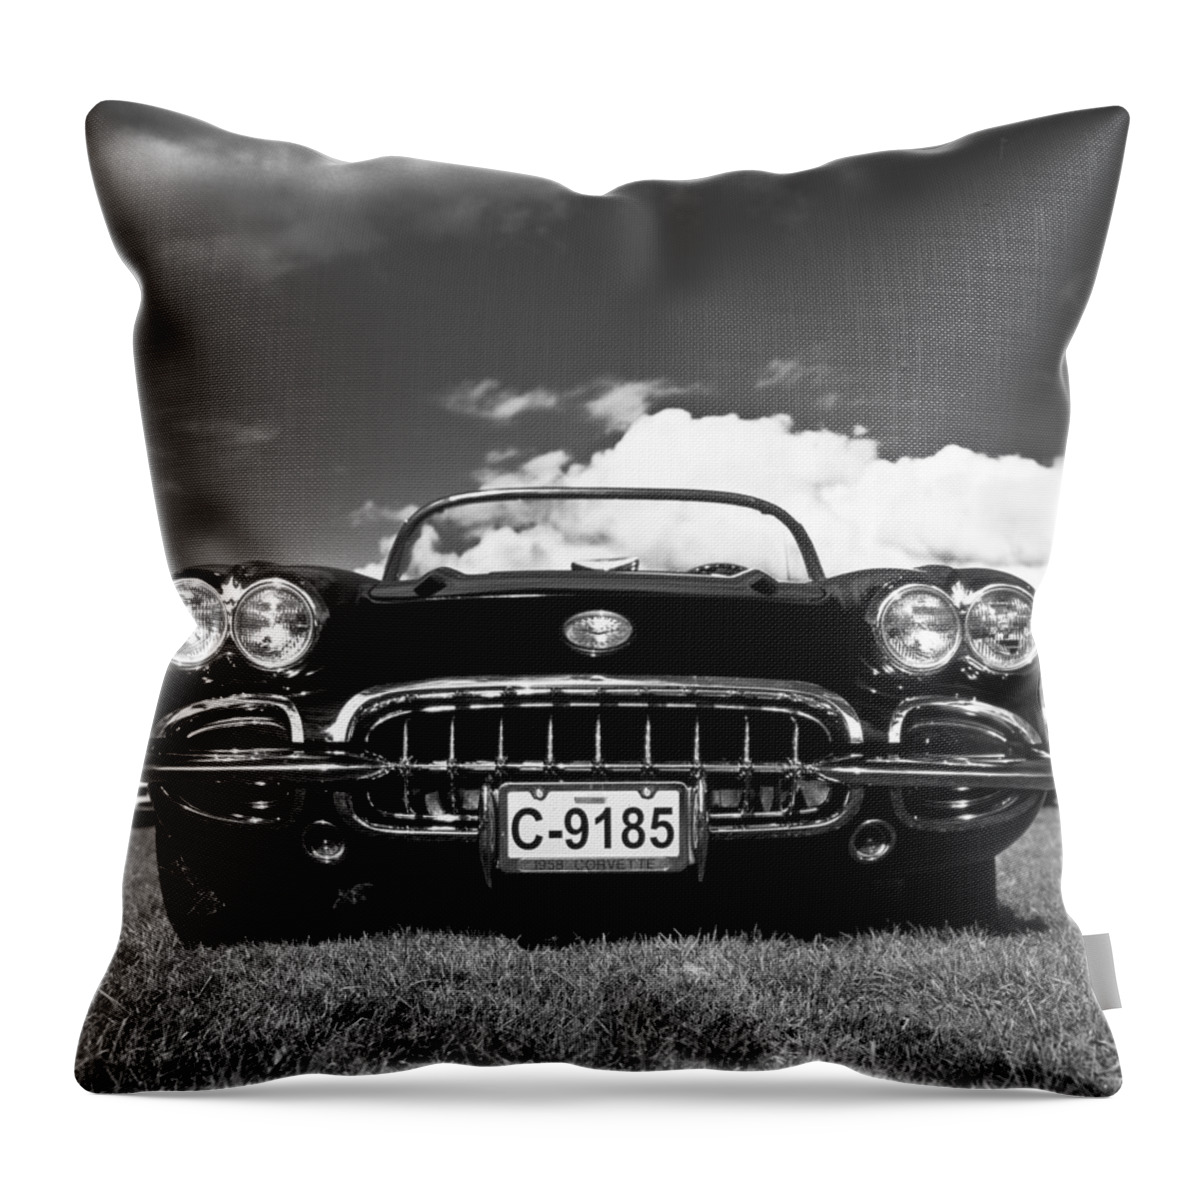 Car Throw Pillow featuring the photograph 1958 Vintage Chevrolet Corvette by Gianfranco Weiss